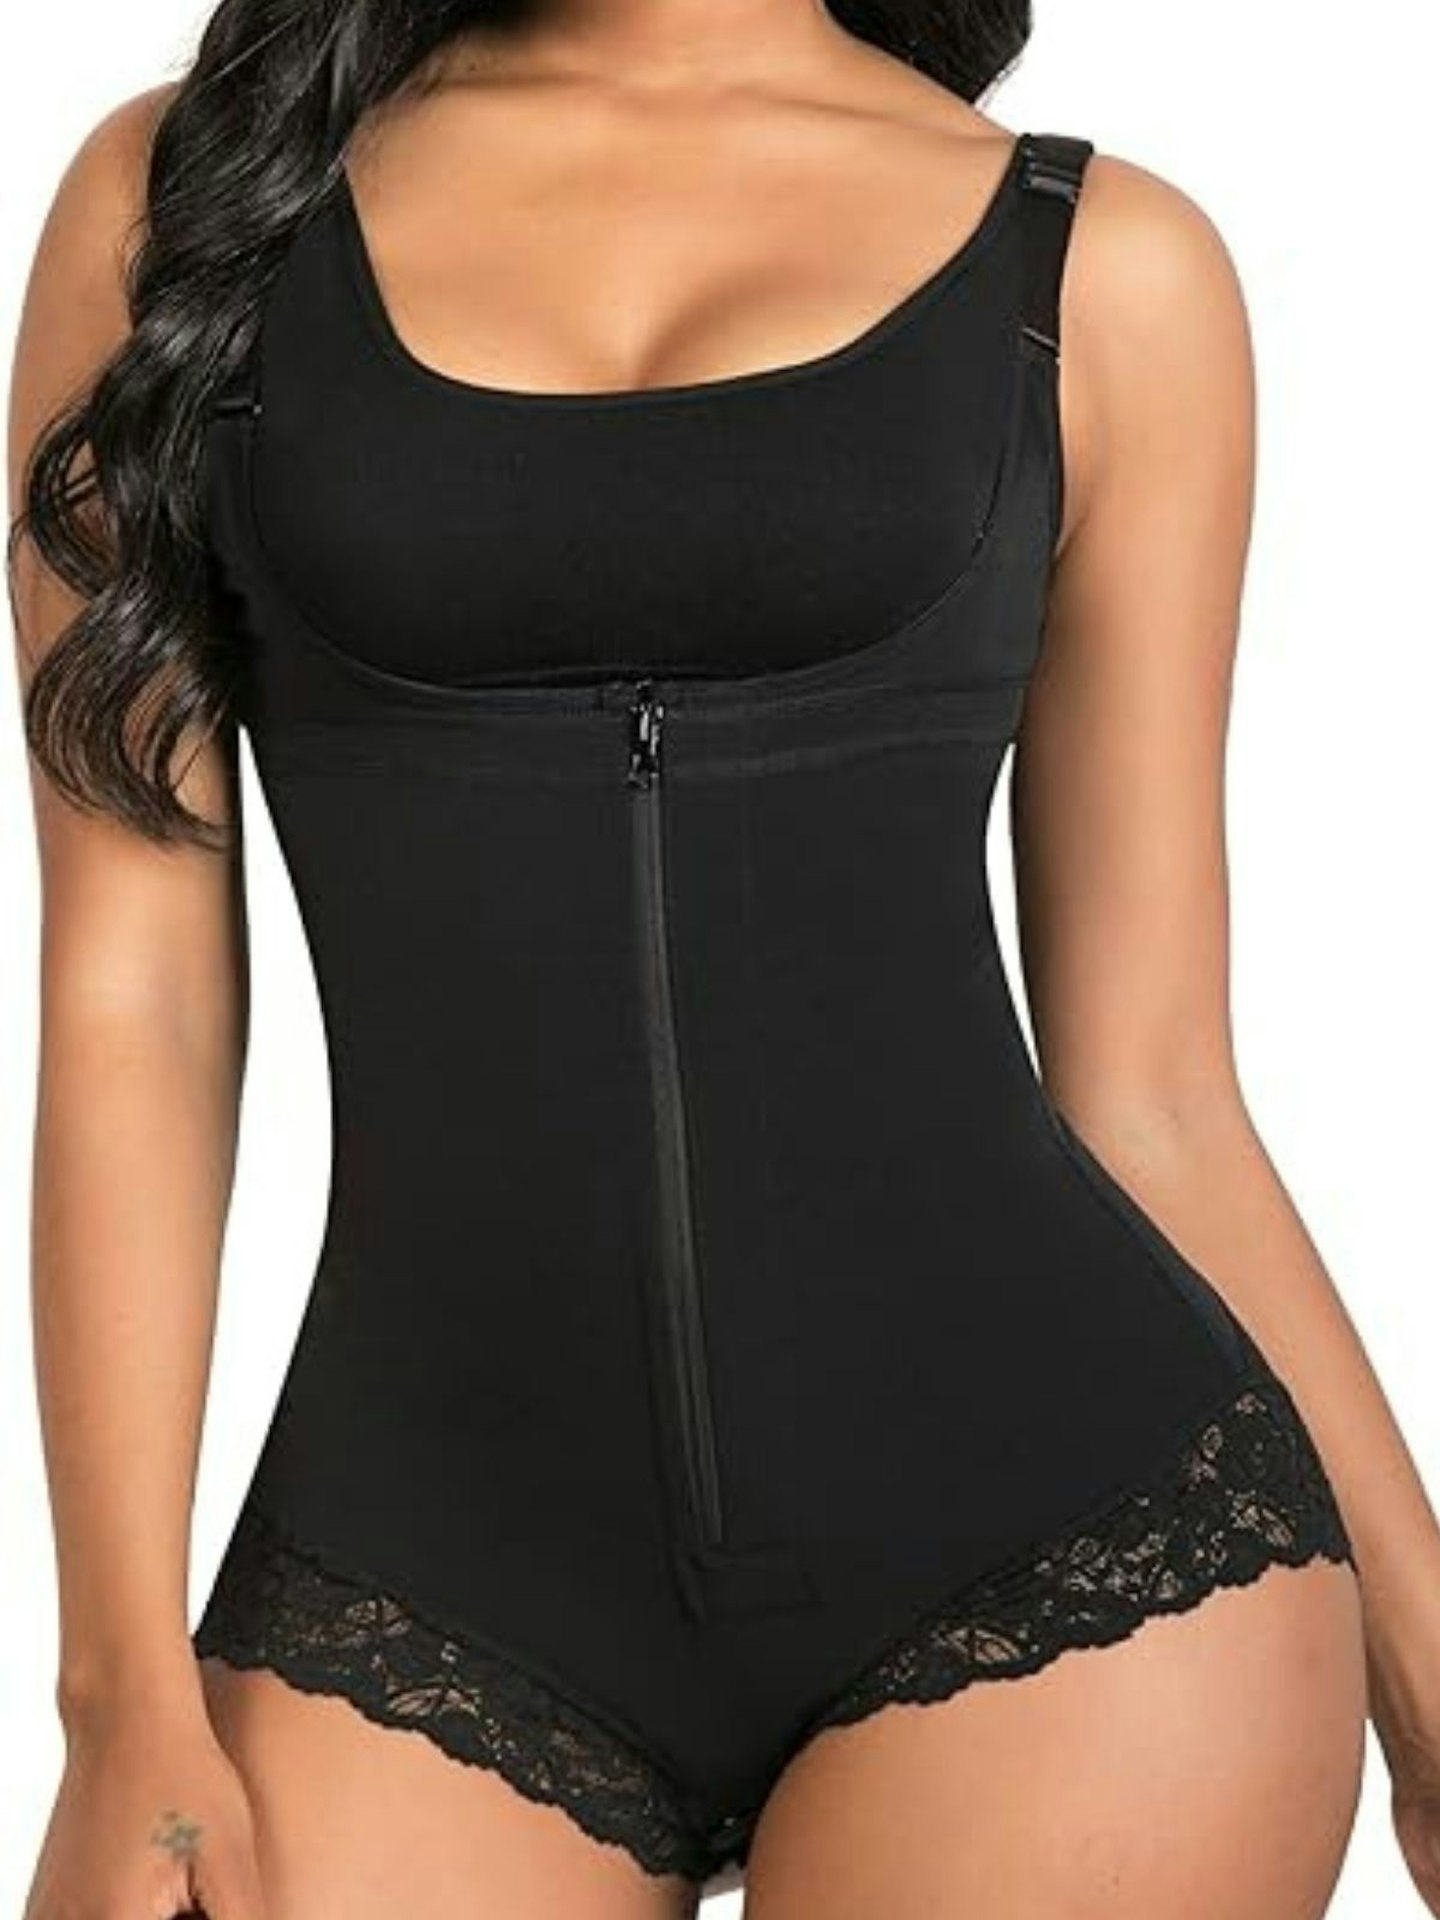 Thong Shapewear Bodysuit For Women Tummy Control Seamless Snatched